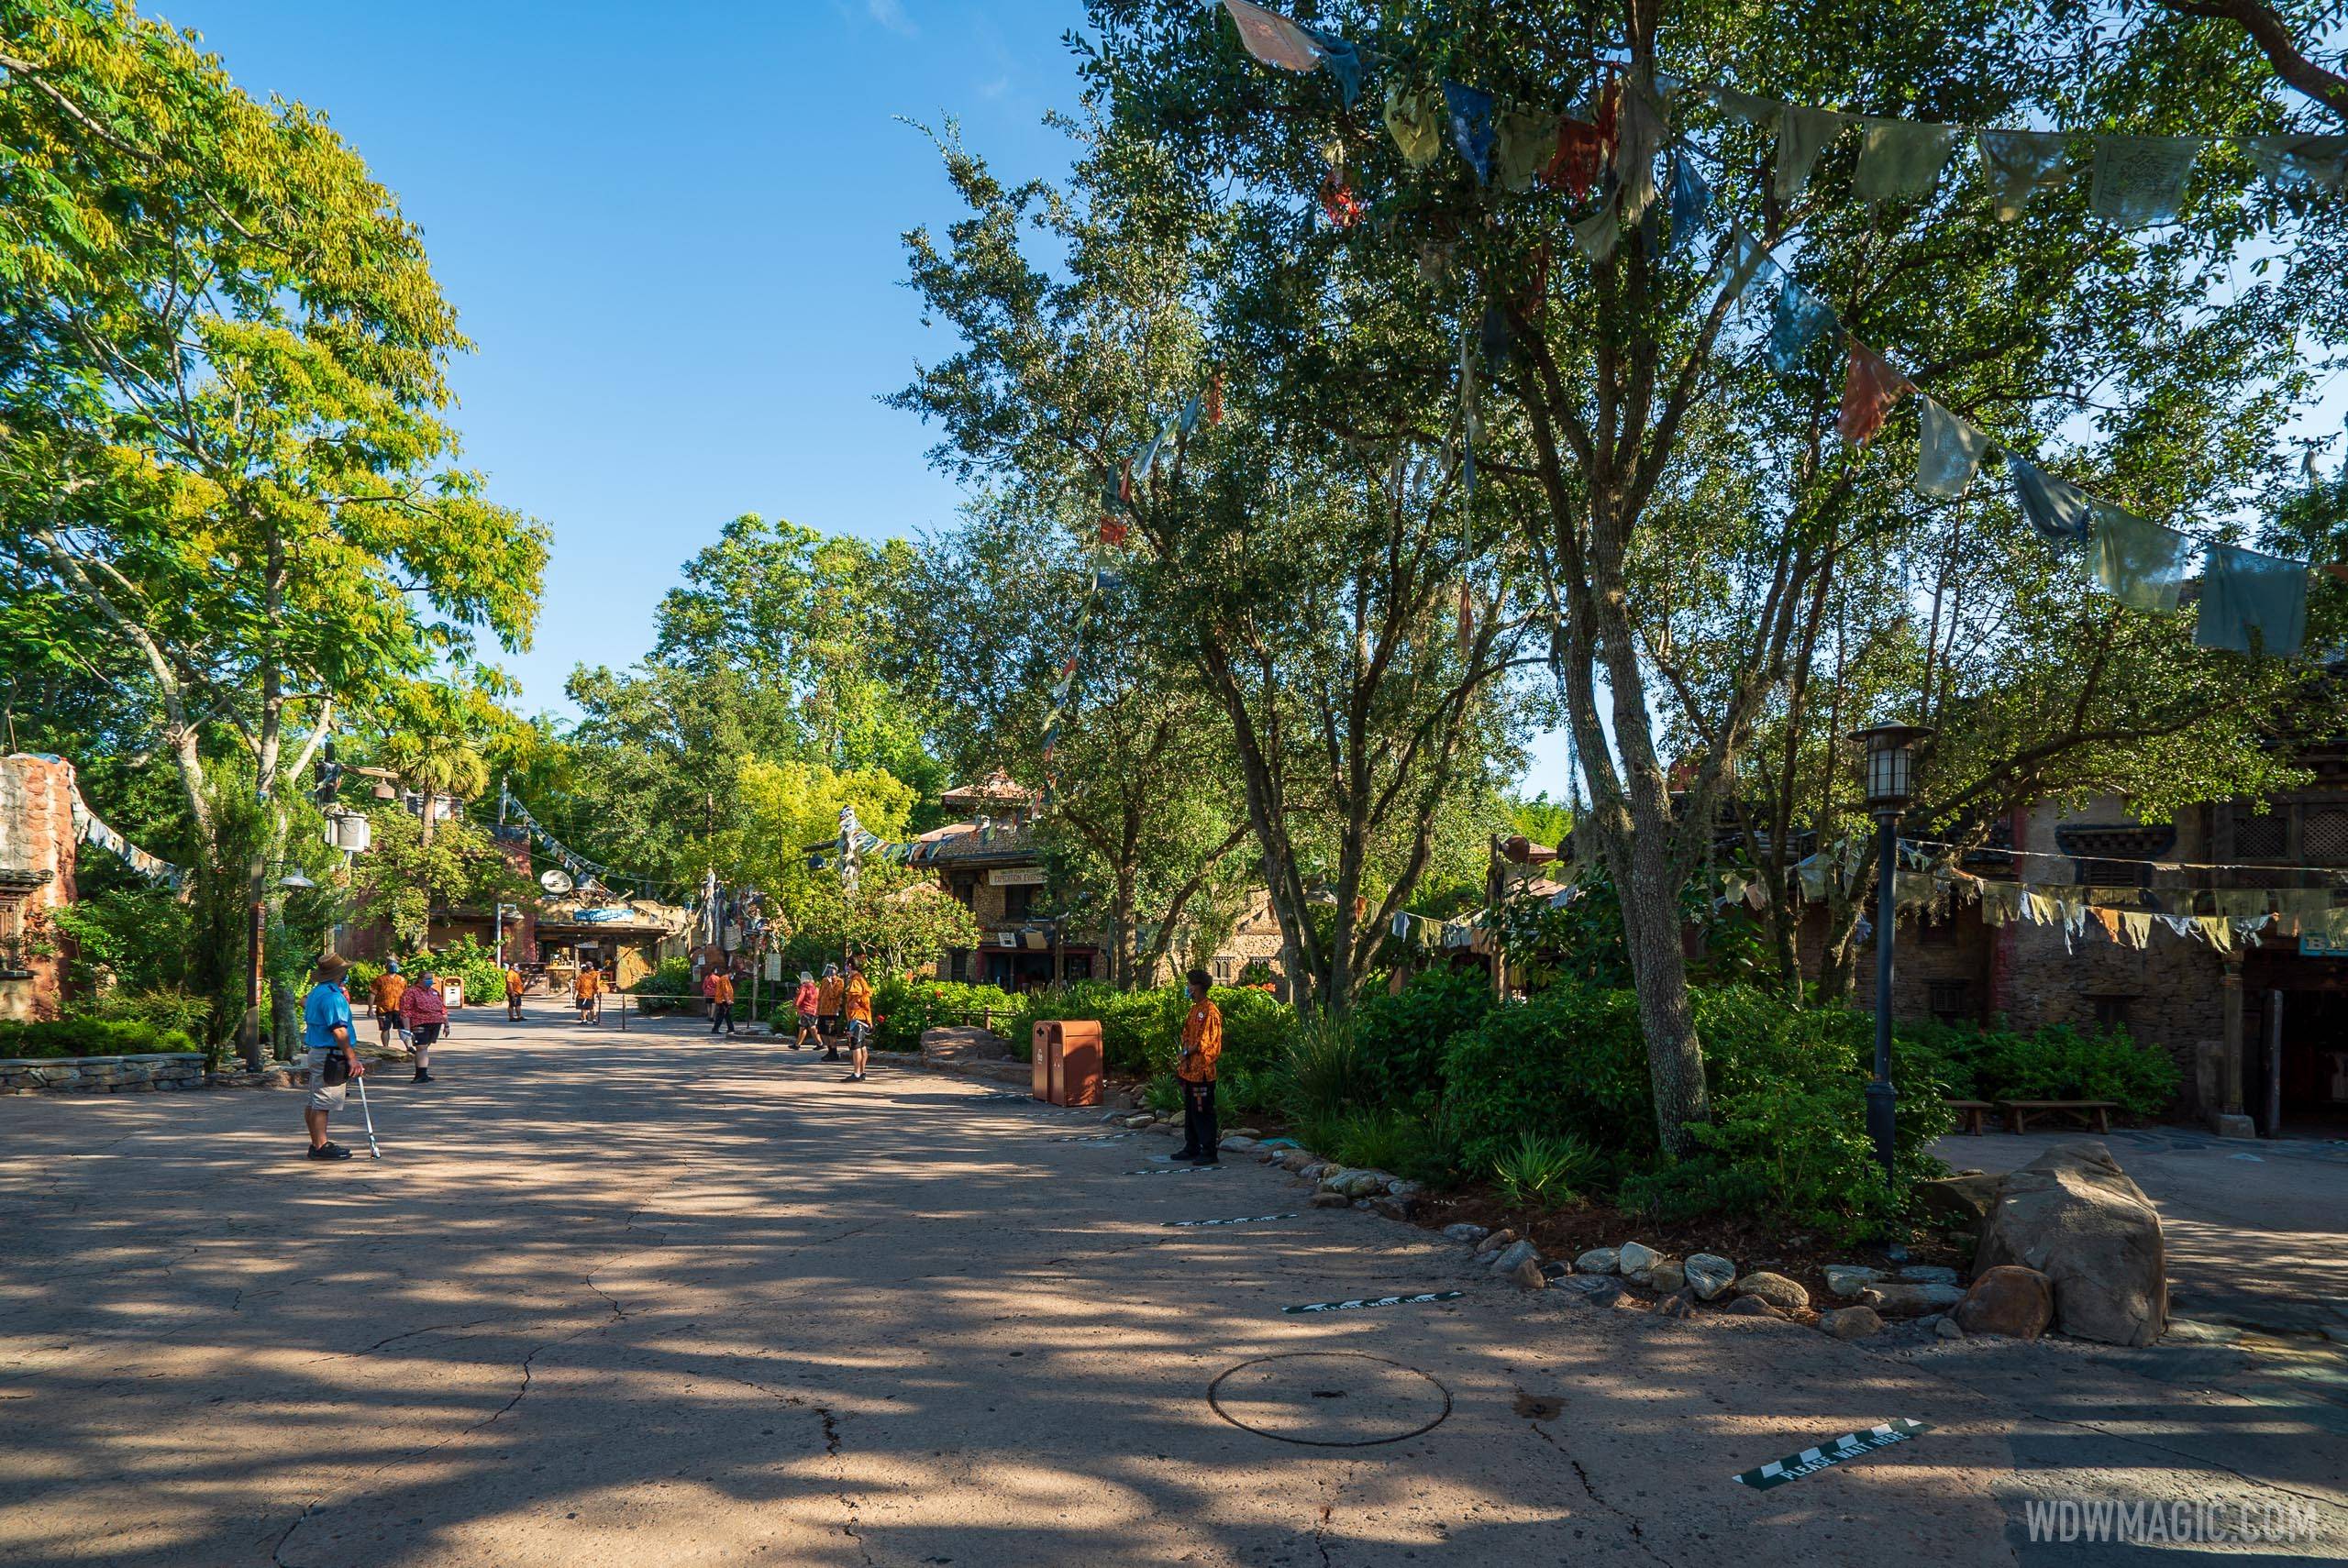 Outside Expedition Everest Cast Members outnumber guests